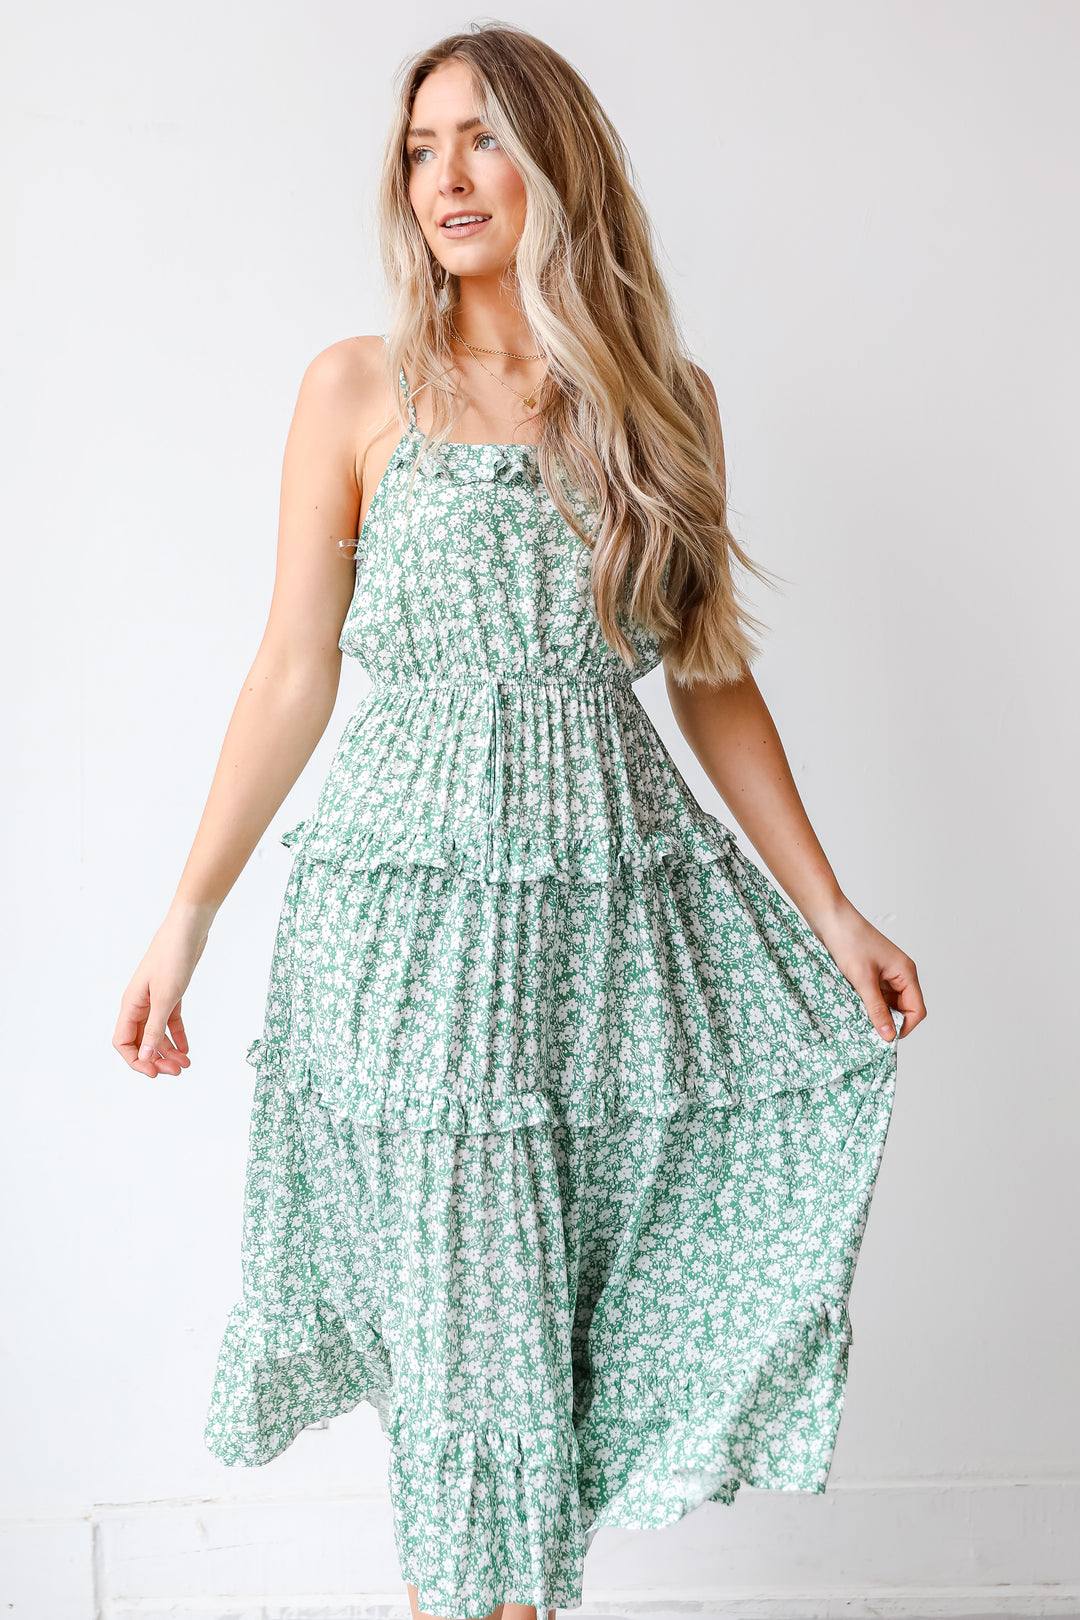 Tiered Floral Maxi Dress from dress up